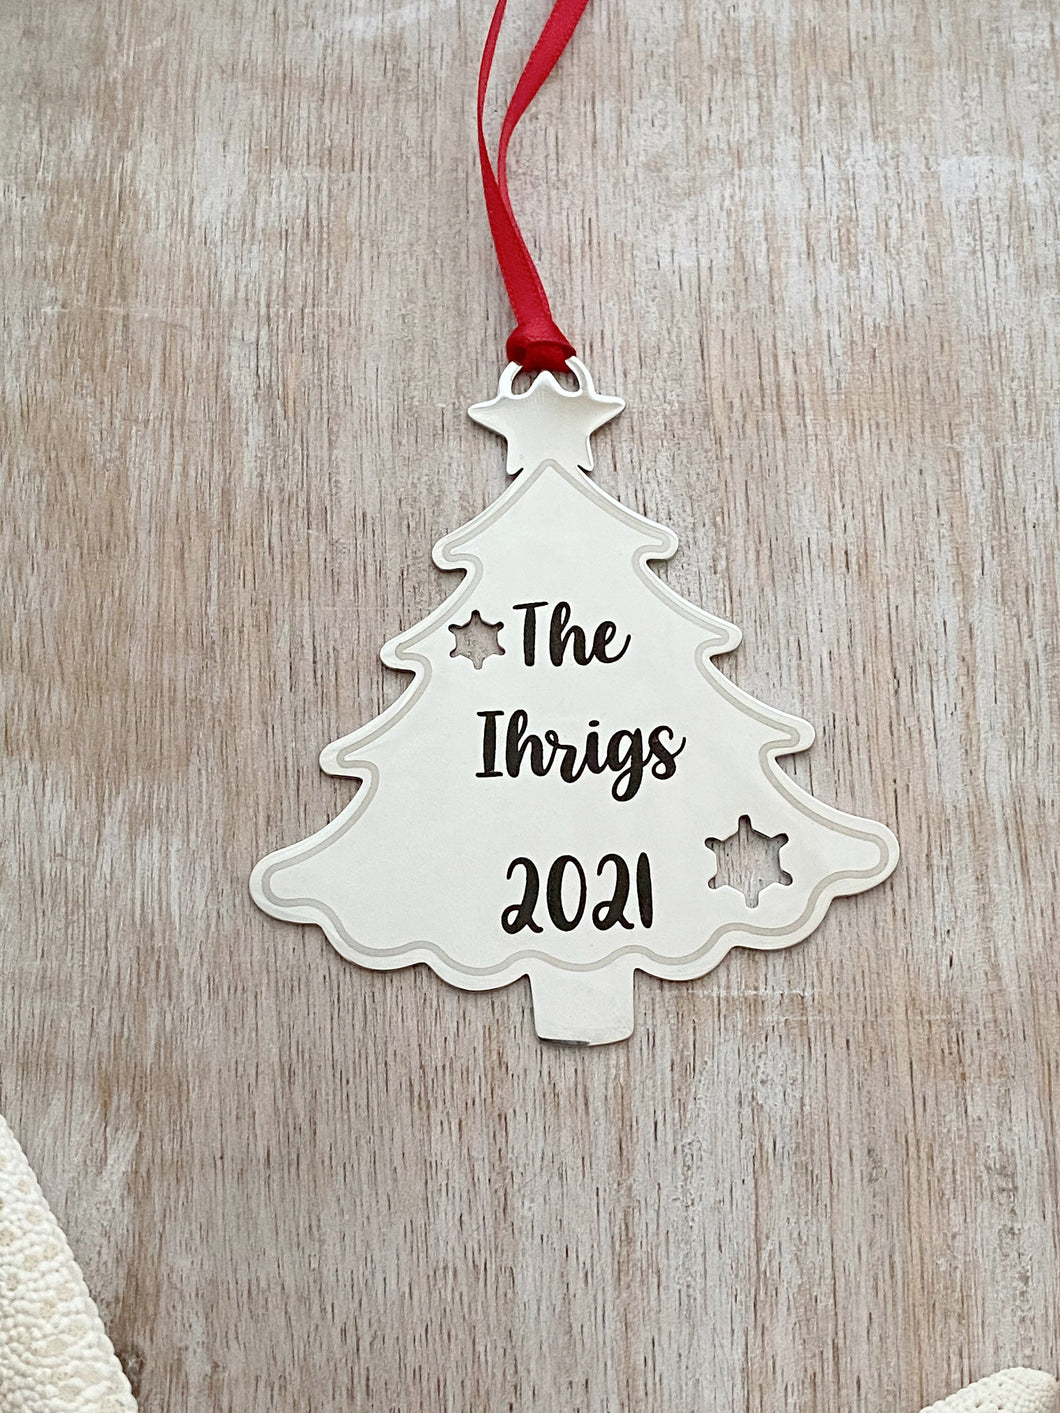 Personalized Christmas Tree Ornament - Silver stainless steel tree shape - Personalized Year Date and Family Last Name - custom engraved